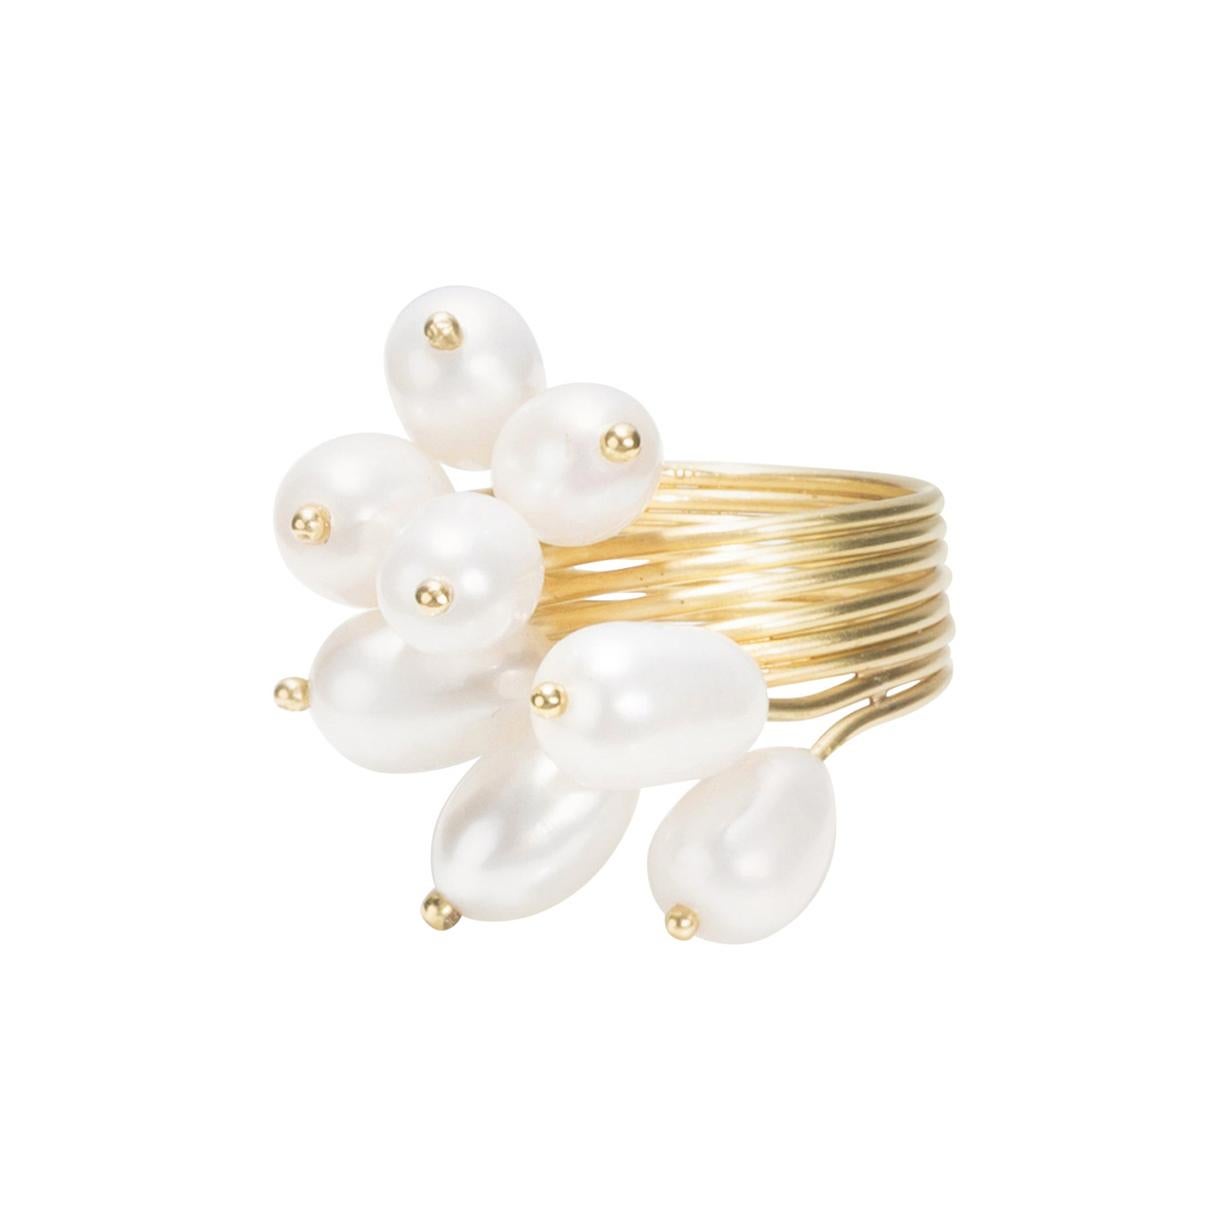 Ambroise Degenève's Unique 18k Gold, Freshwater Pearls, Silver 750 Roseaux  Ring For Sale at 1stDibs